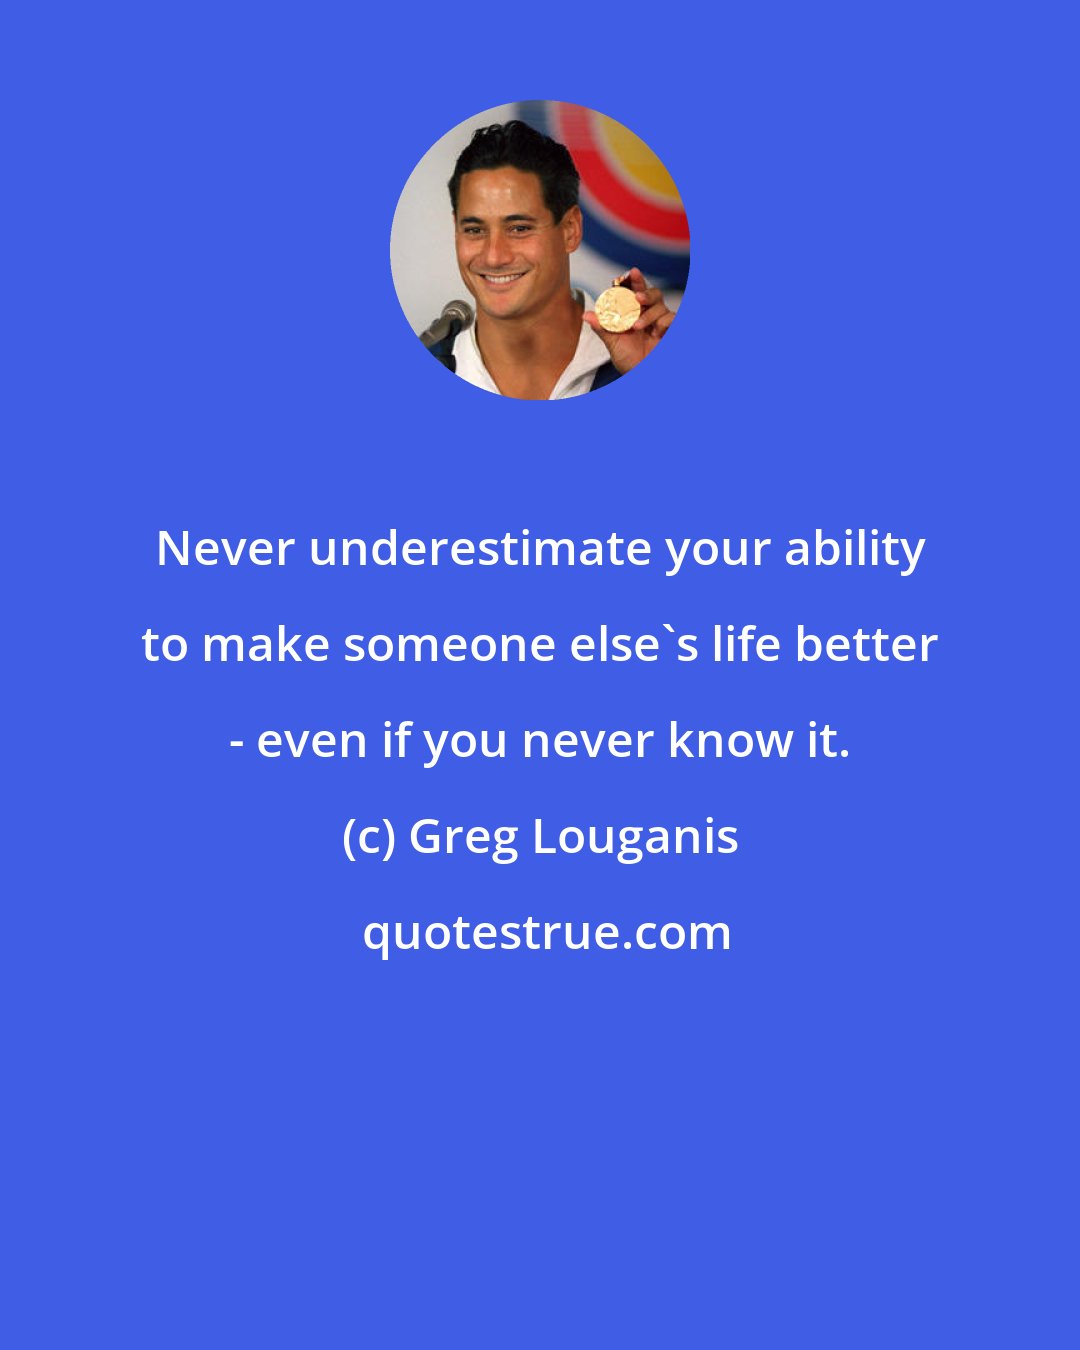 Greg Louganis: Never underestimate your ability to make someone else's life better - even if you never know it.